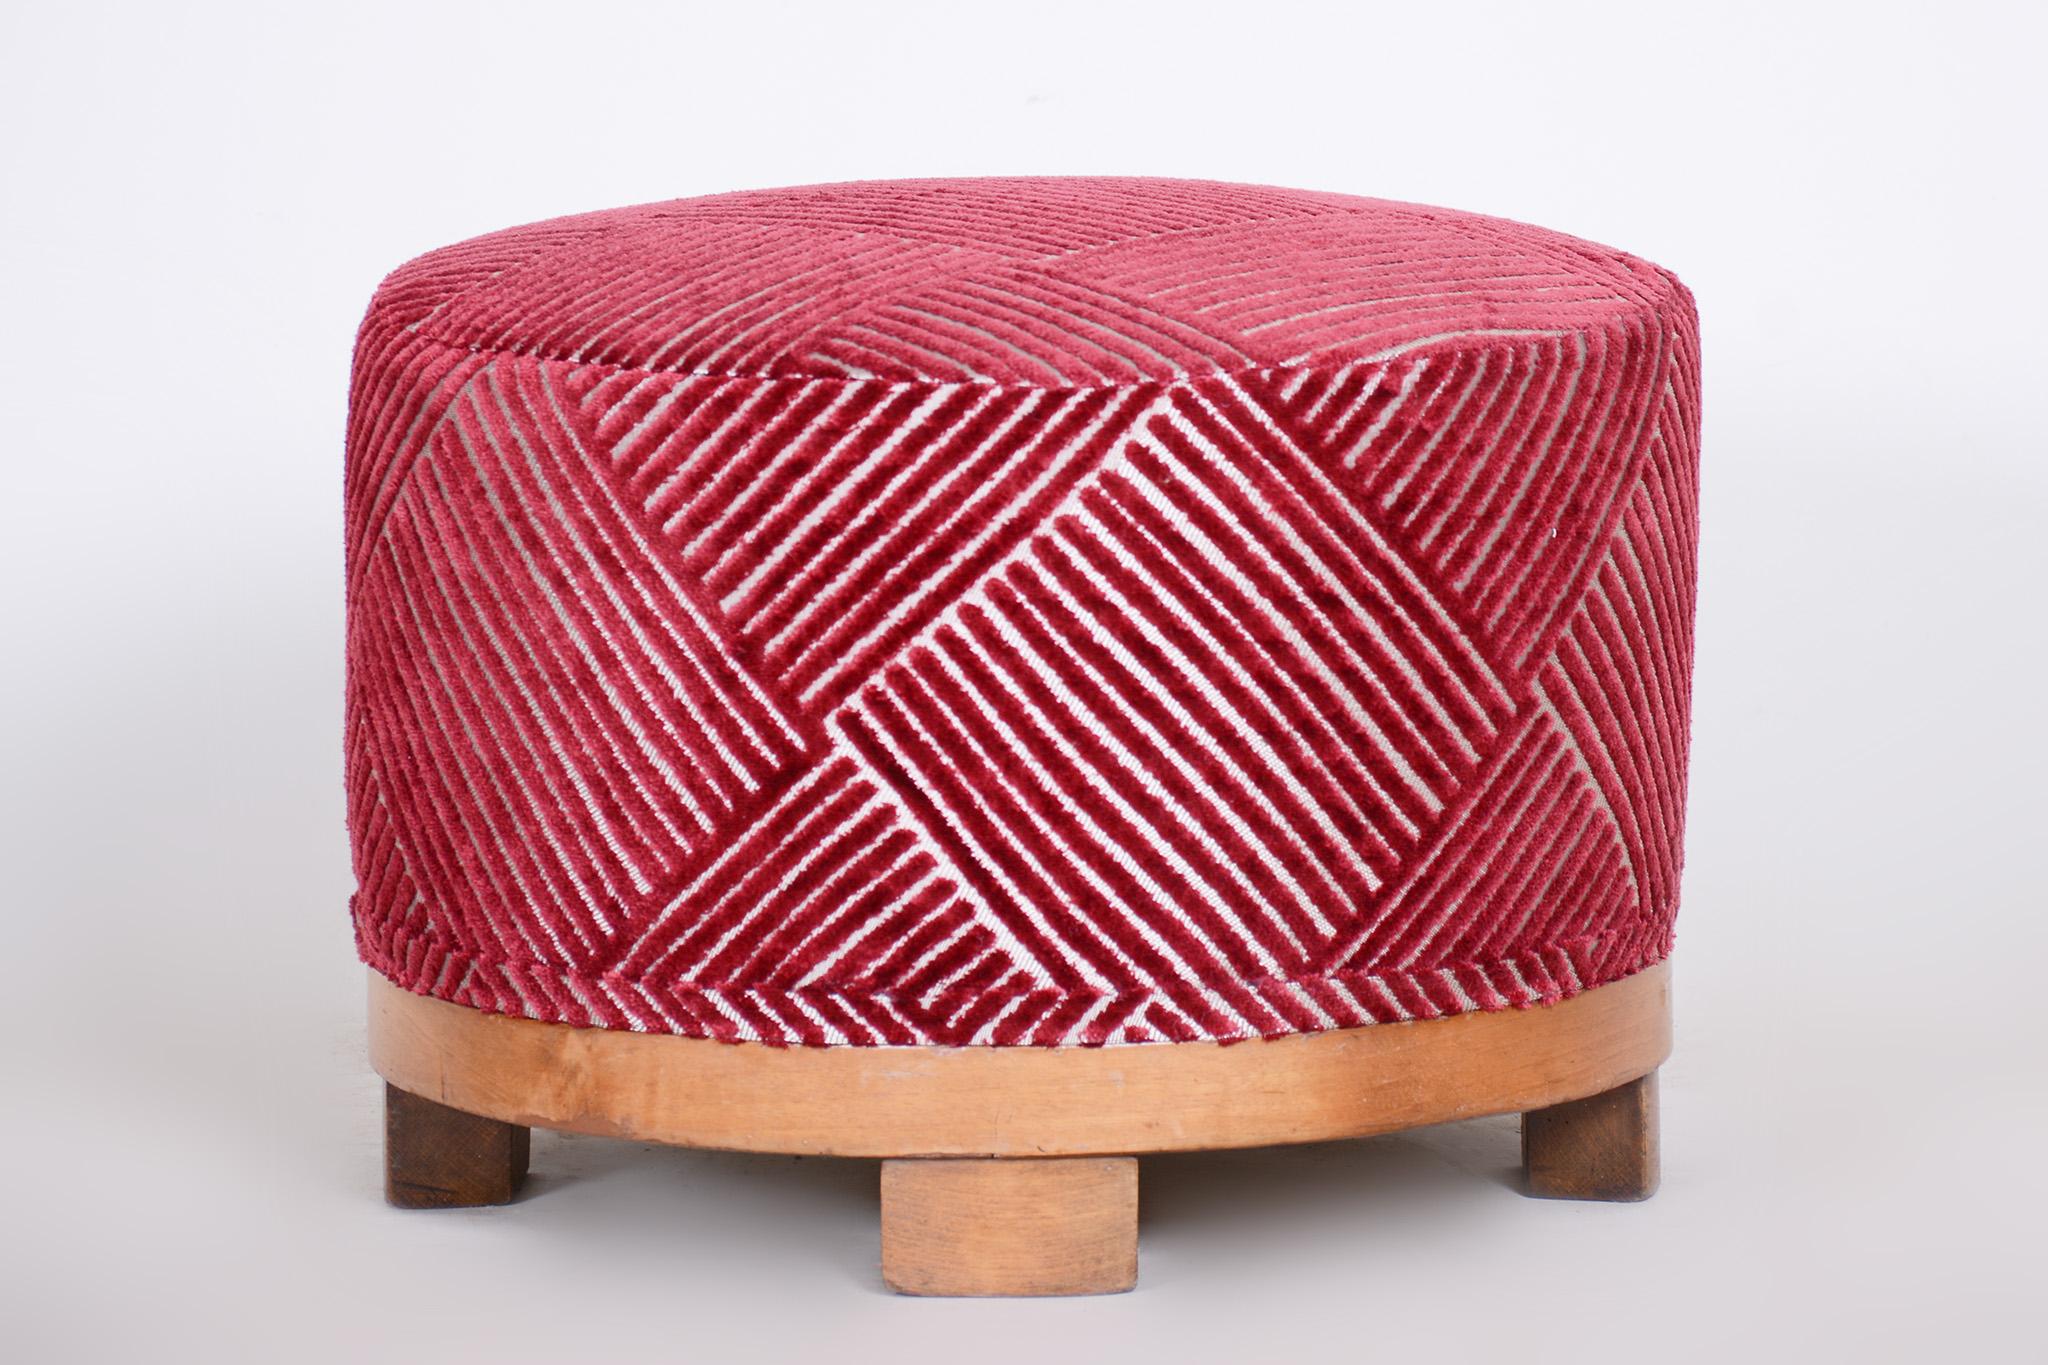 Fabric Red Art Deco Stool, Made in the 1920s, Fully Restored